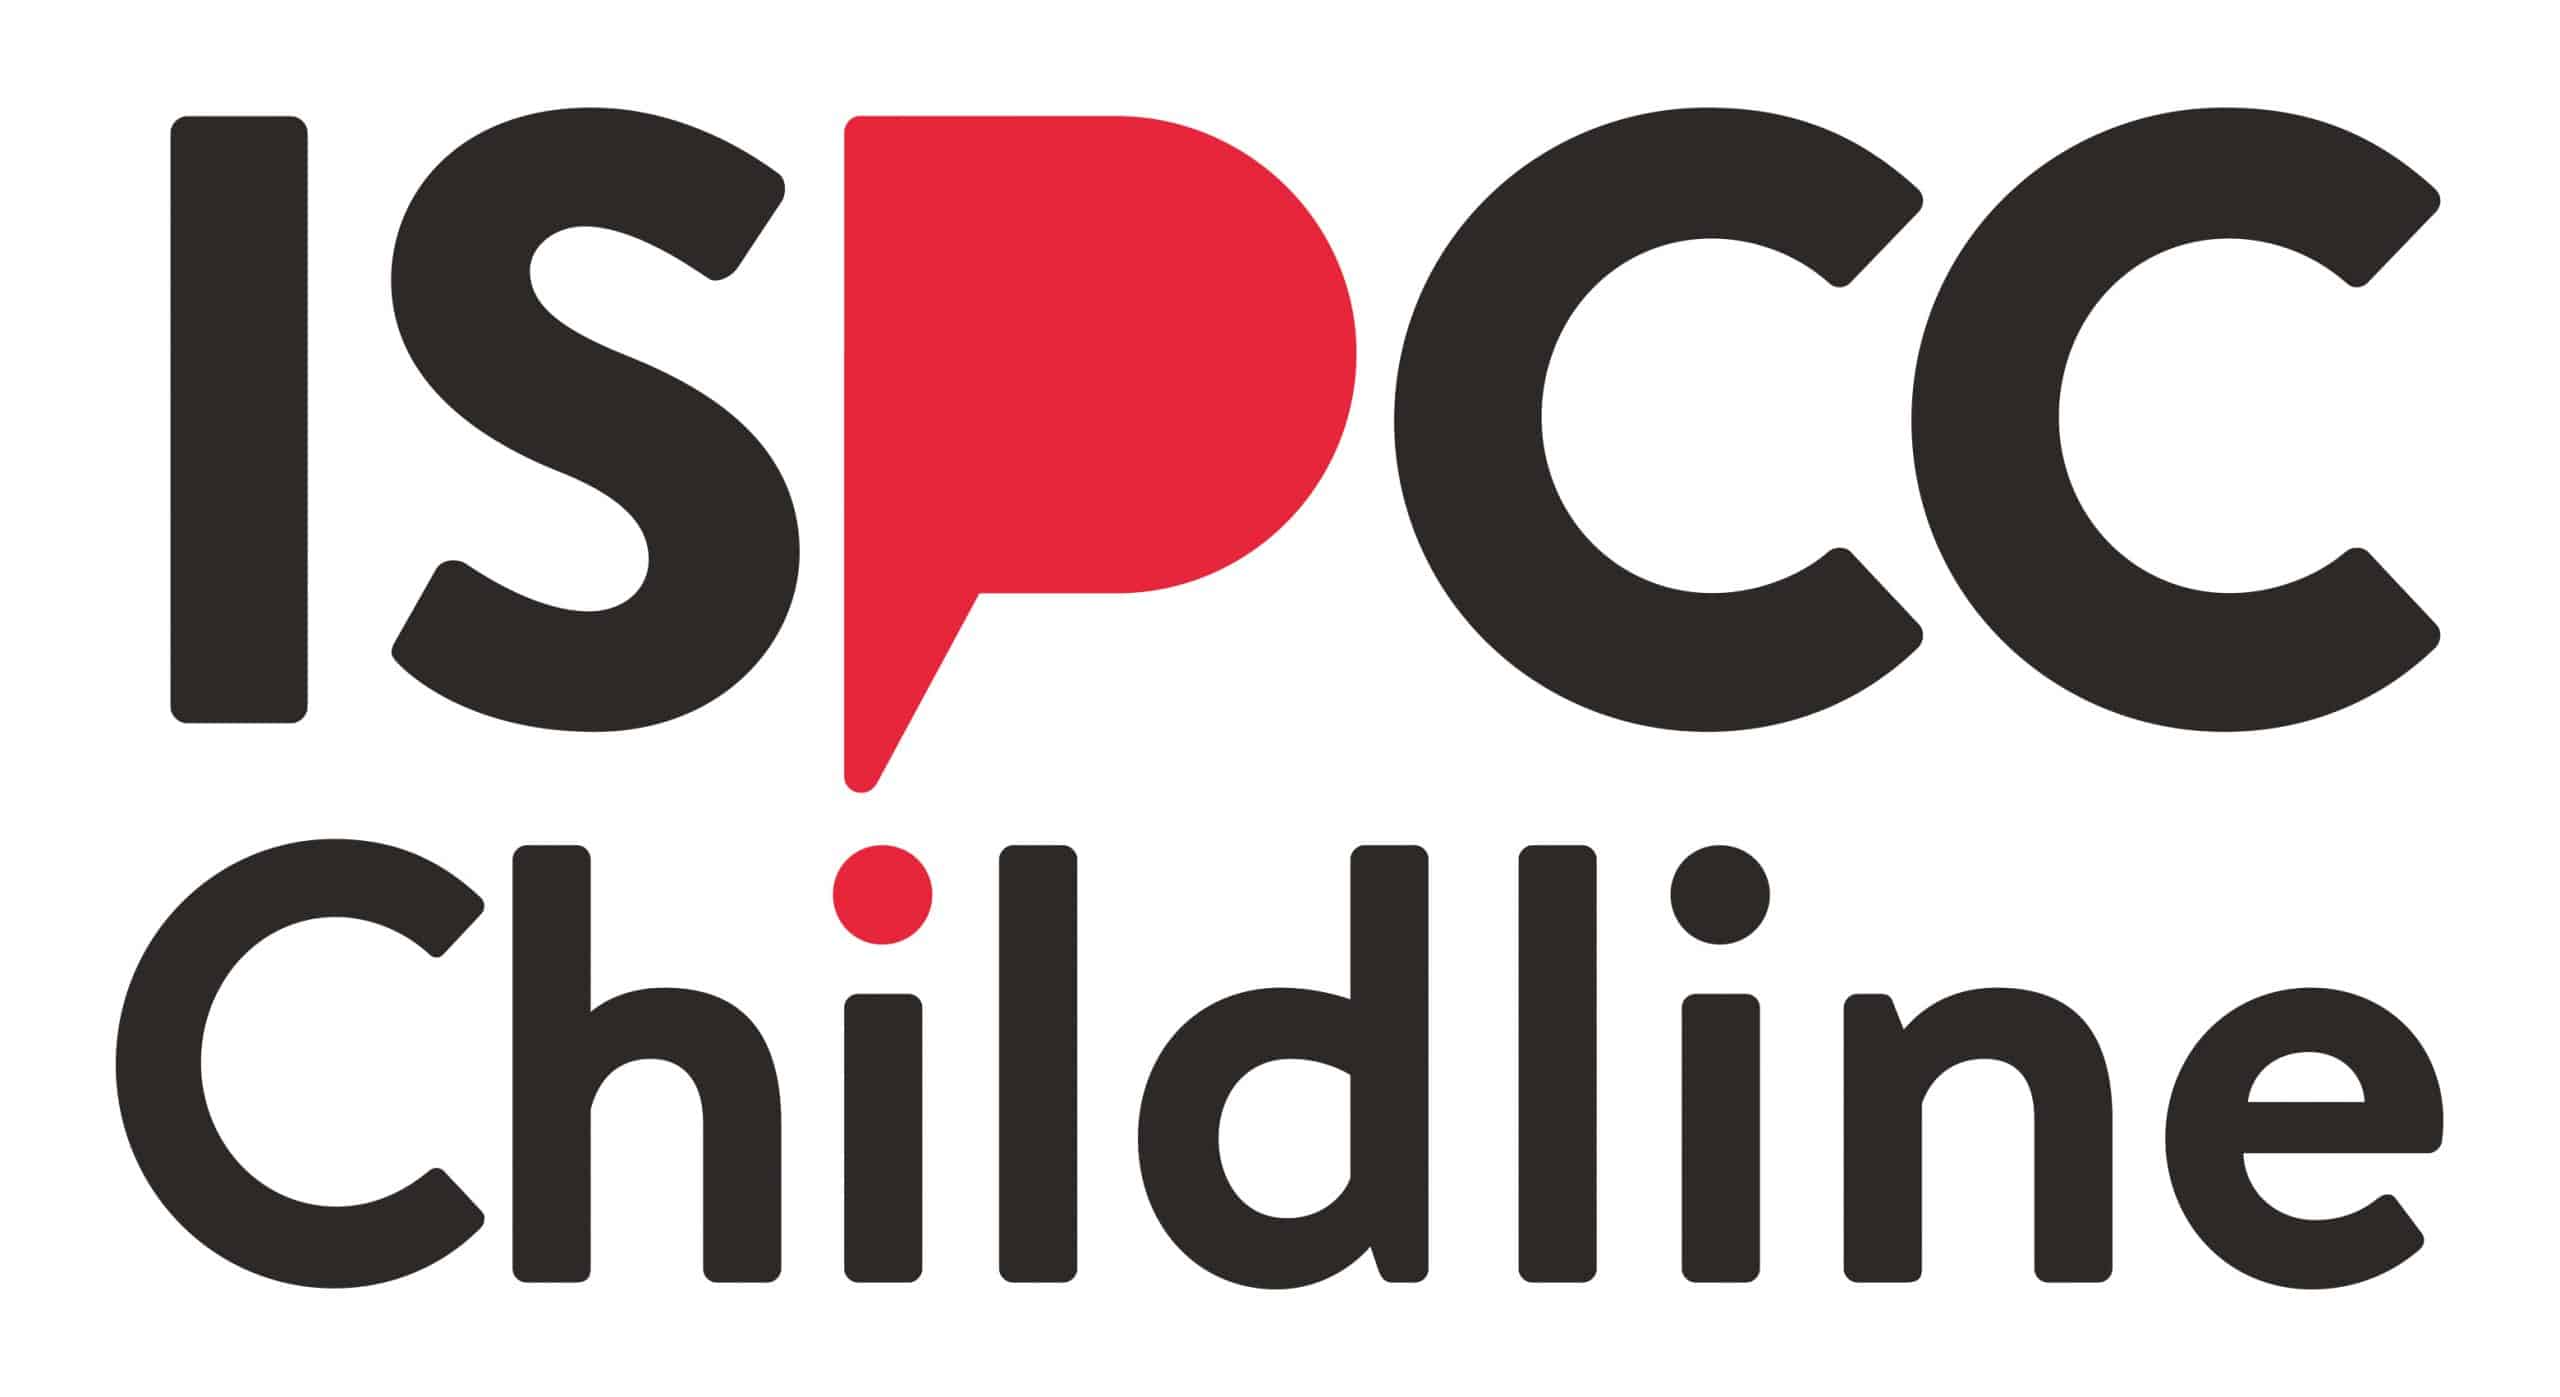 Irish Society for the Prevention of Cruelty to Children (ISPCC)